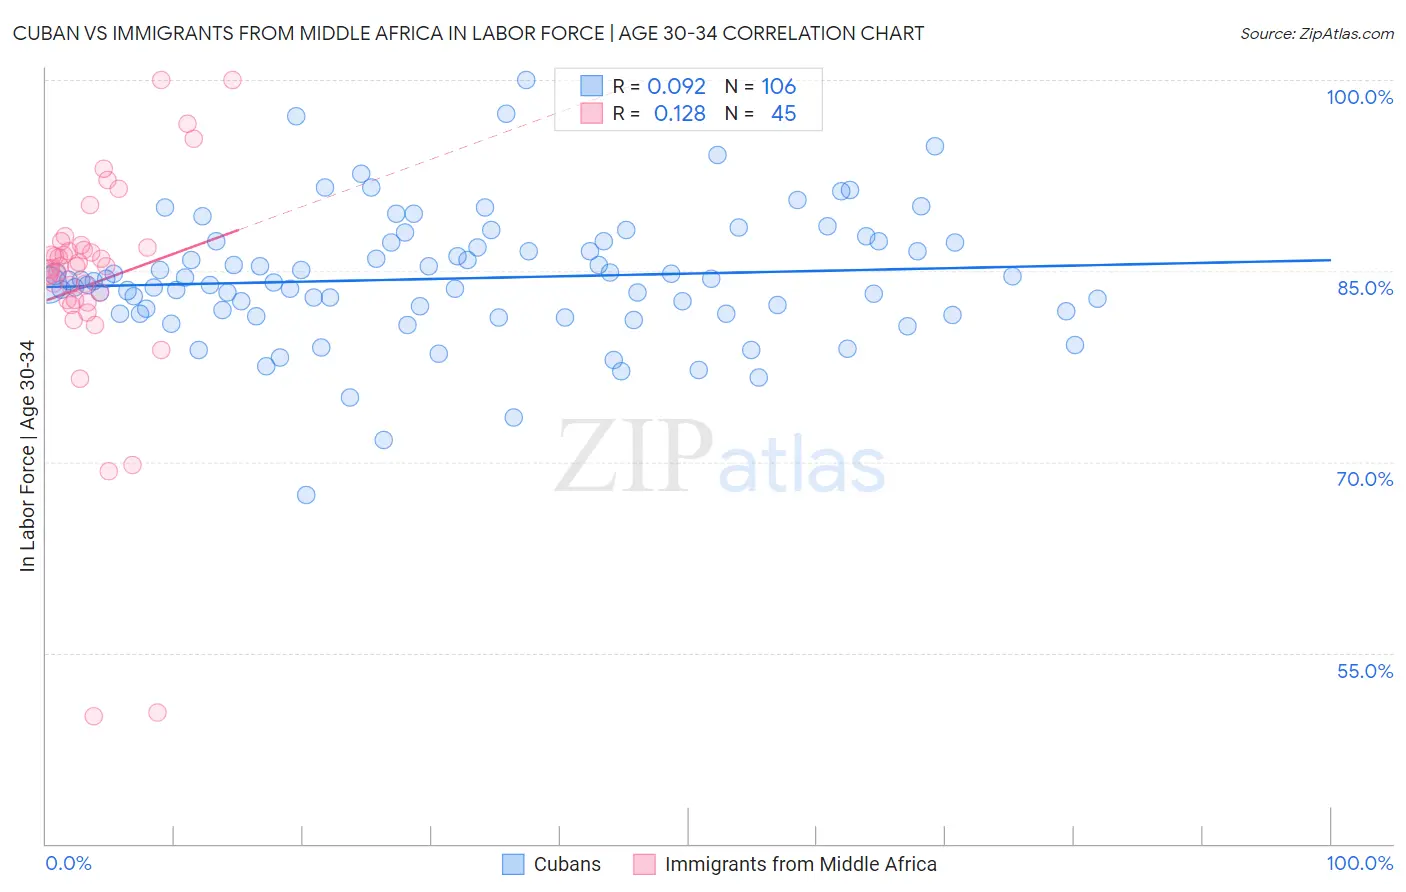 Cuban vs Immigrants from Middle Africa In Labor Force | Age 30-34